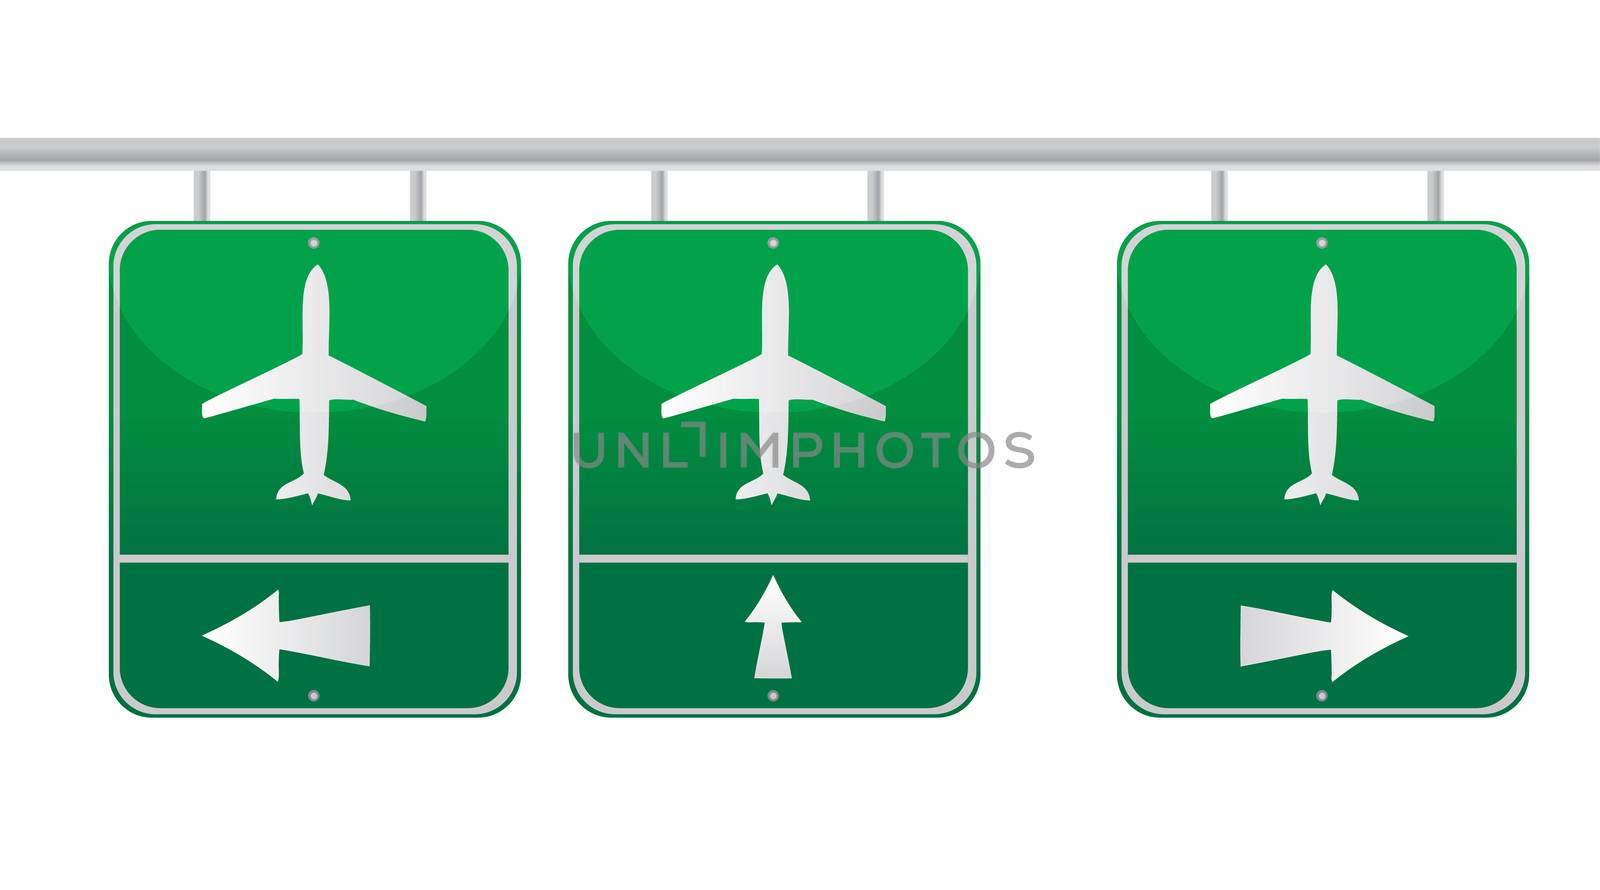 aircraft traffic sign illustration design over white by alexmillos